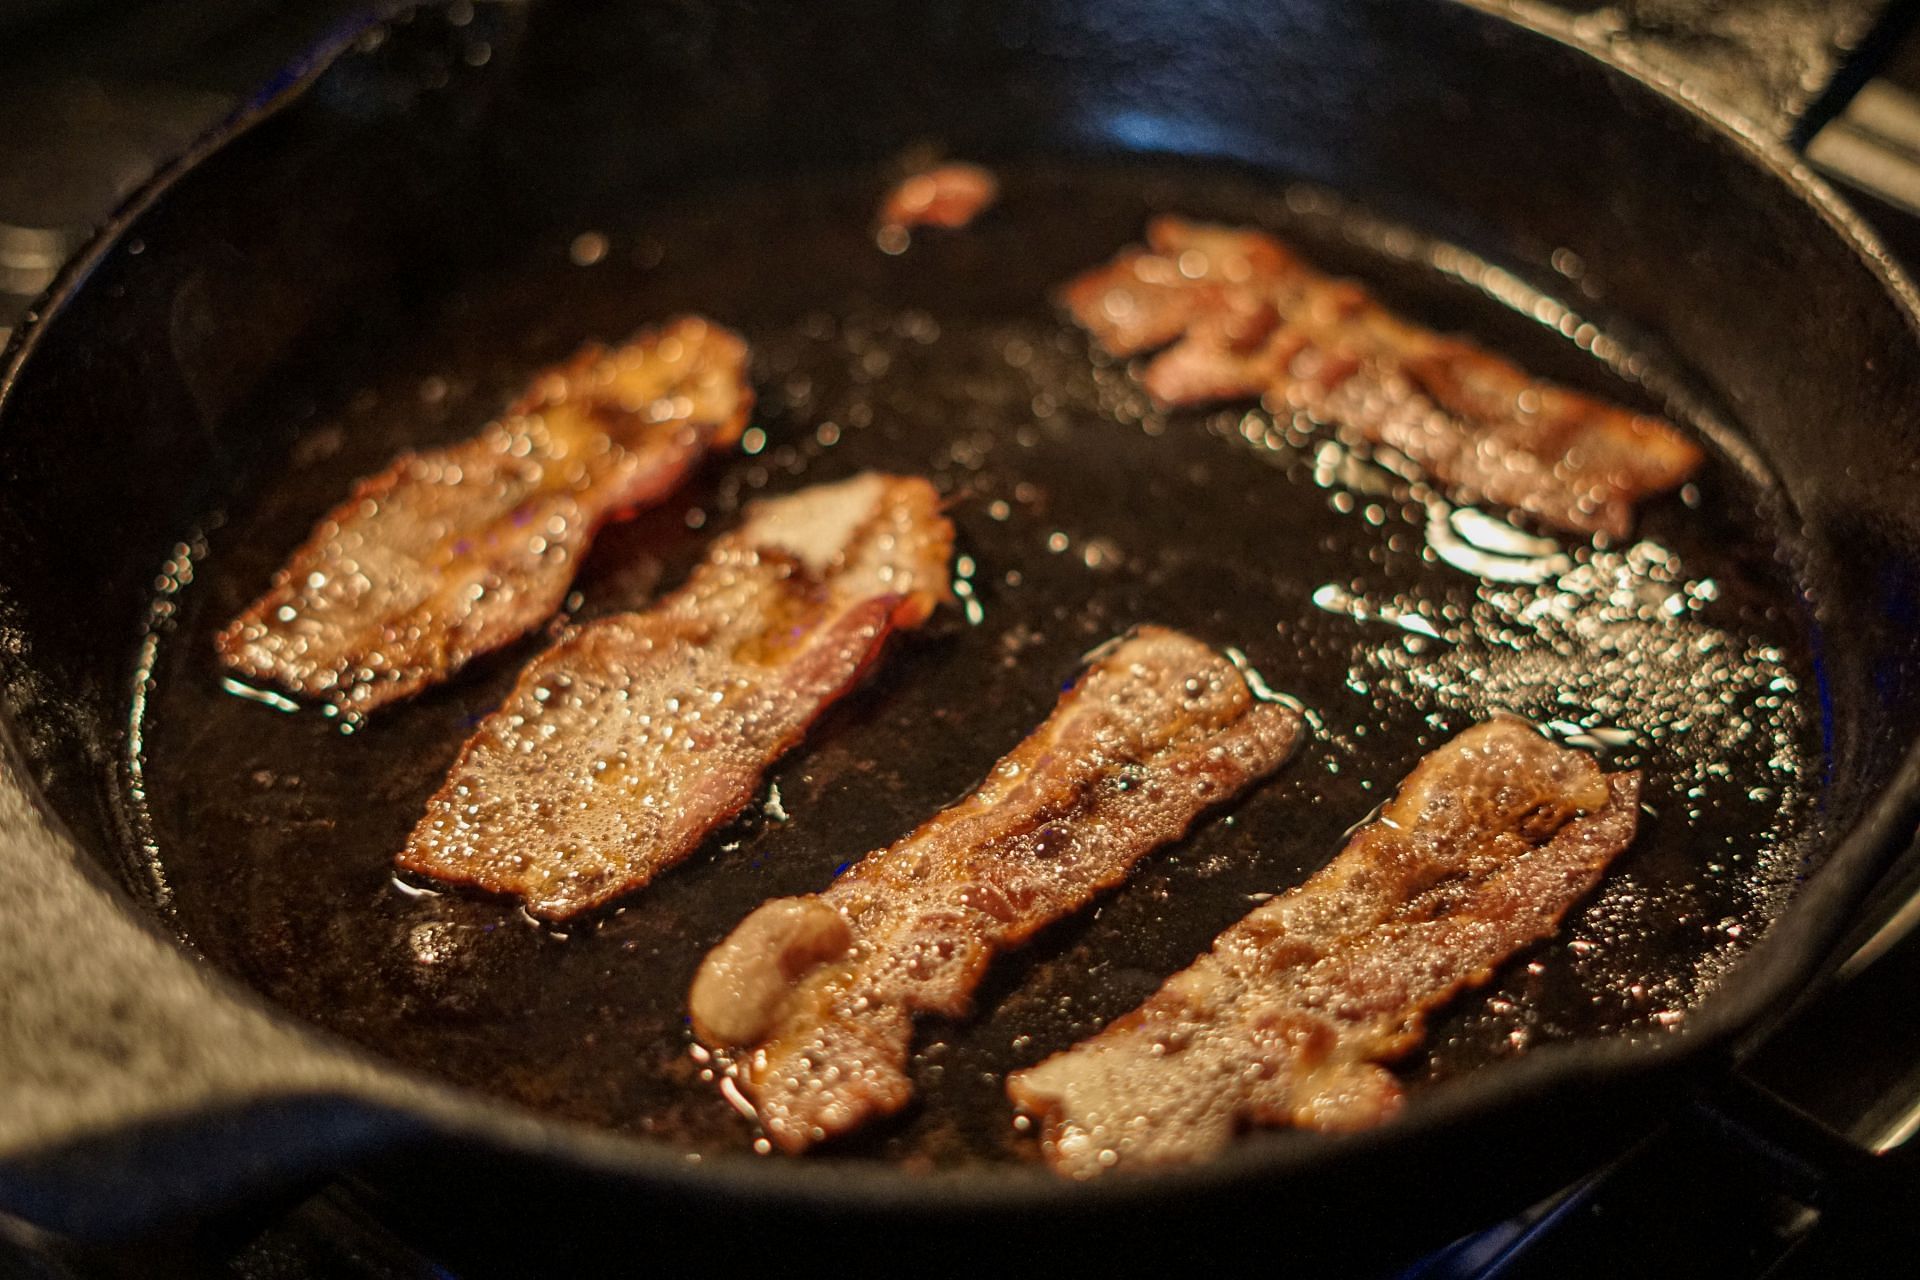 Processed meats contain an incredibly high amount of sodium and fat, which isn&#039;t good for you. (Image via Unsplash/Thomas Park)